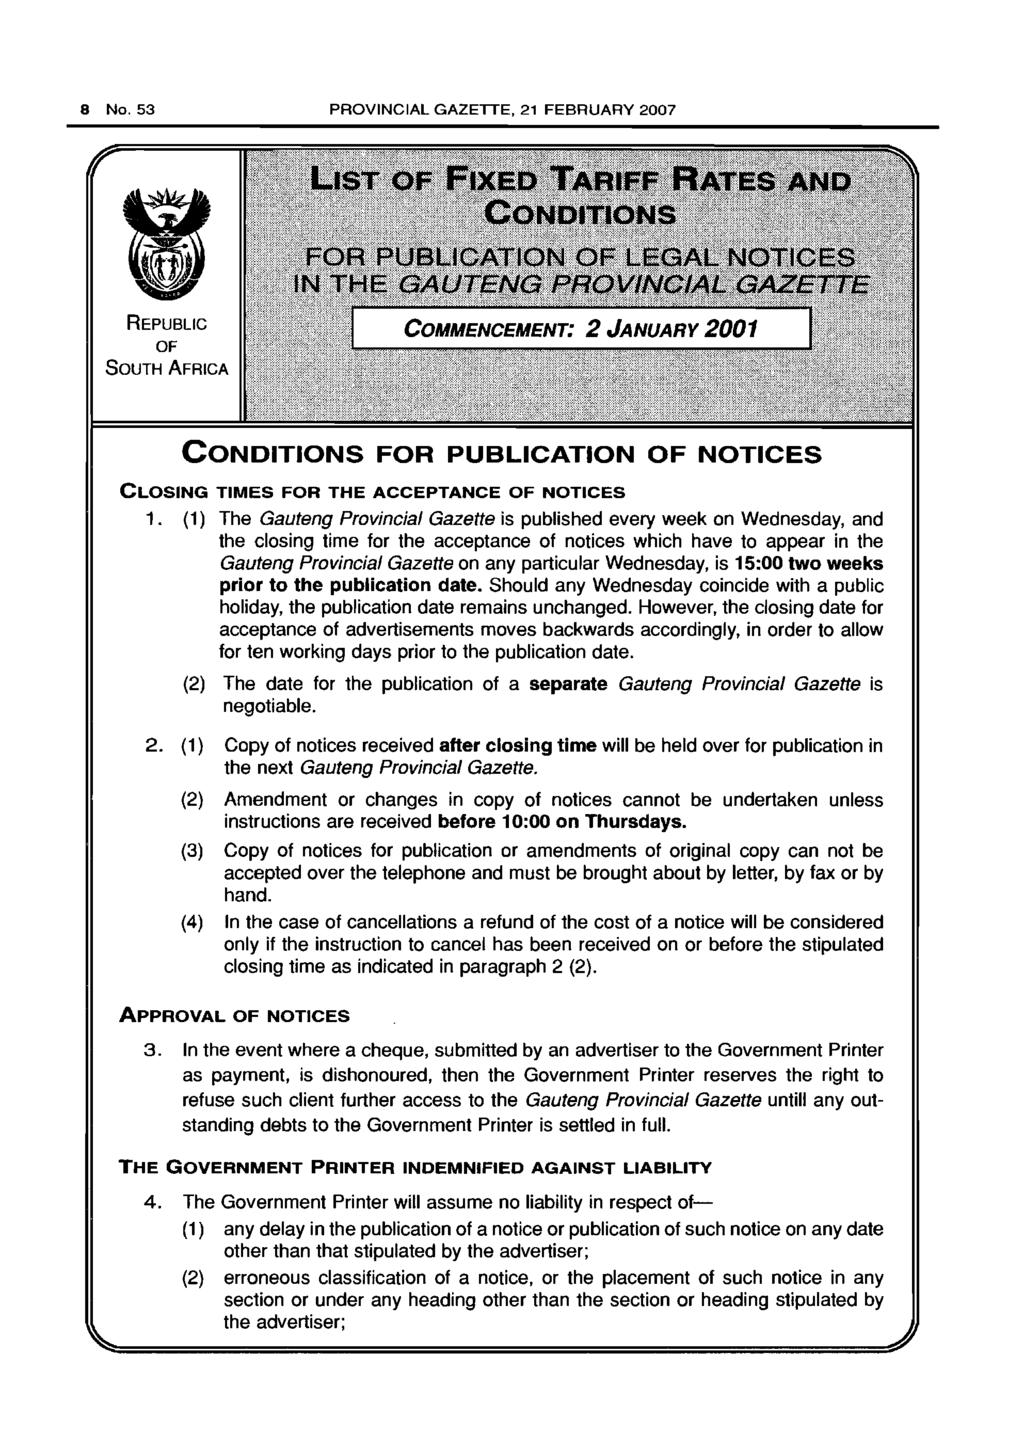 8 No. 53 PROVINCIAL GAZETTE, 21 FEBRUARY 2007 REPUBLIC OF SOUTH AFRICA CONDITIONS FOR PUBLICATION OF NOTICES CLOSING TIMES FOR THE ACCEPTANCE OF NOTICES 1.